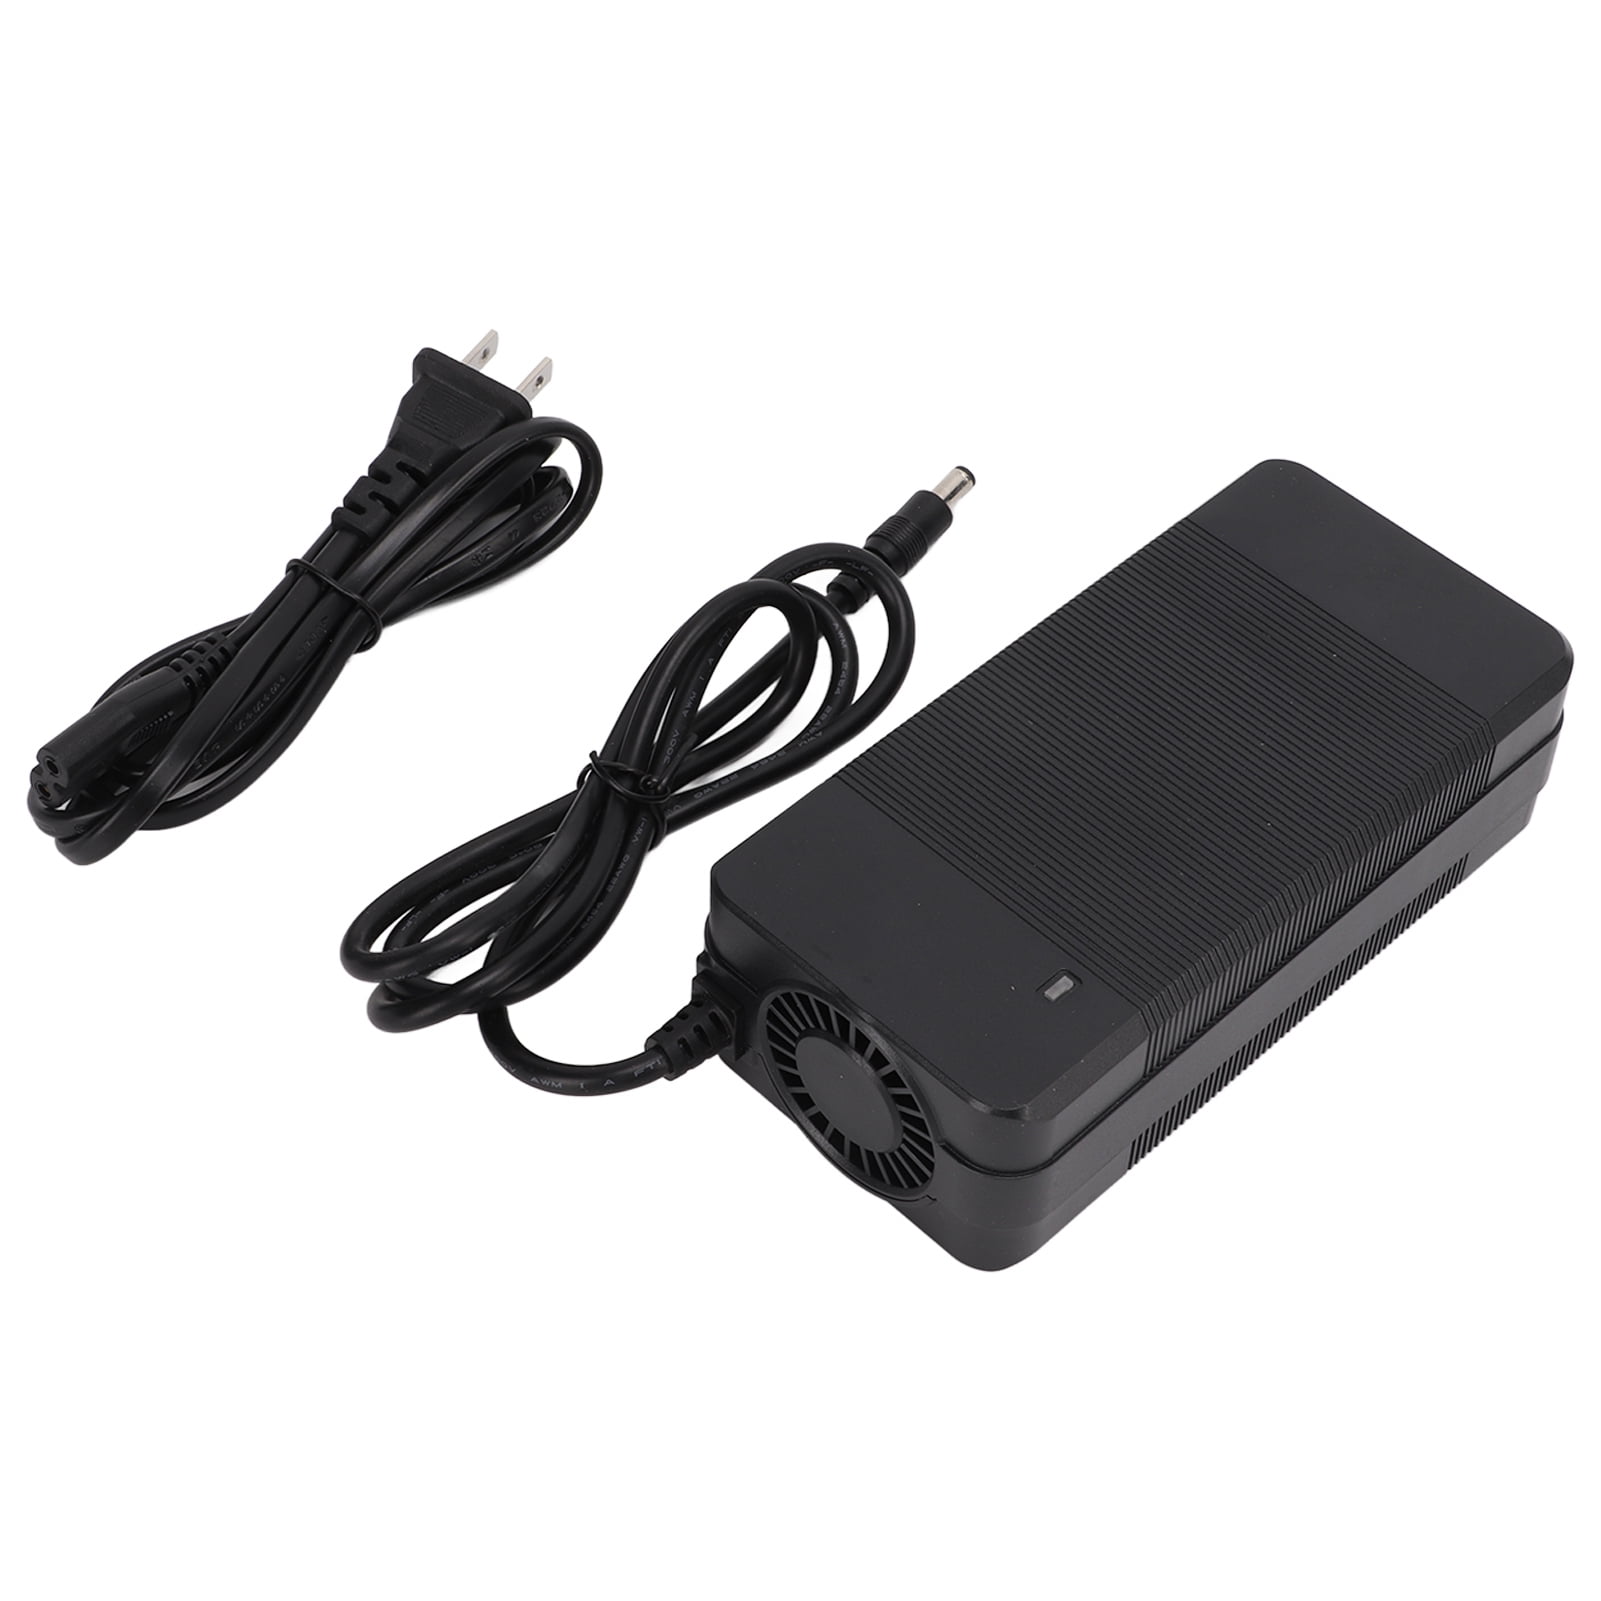 DC 12V Clip Power Charger Adapter for Wheels Grey Battery 12 Volt PSU Mains 